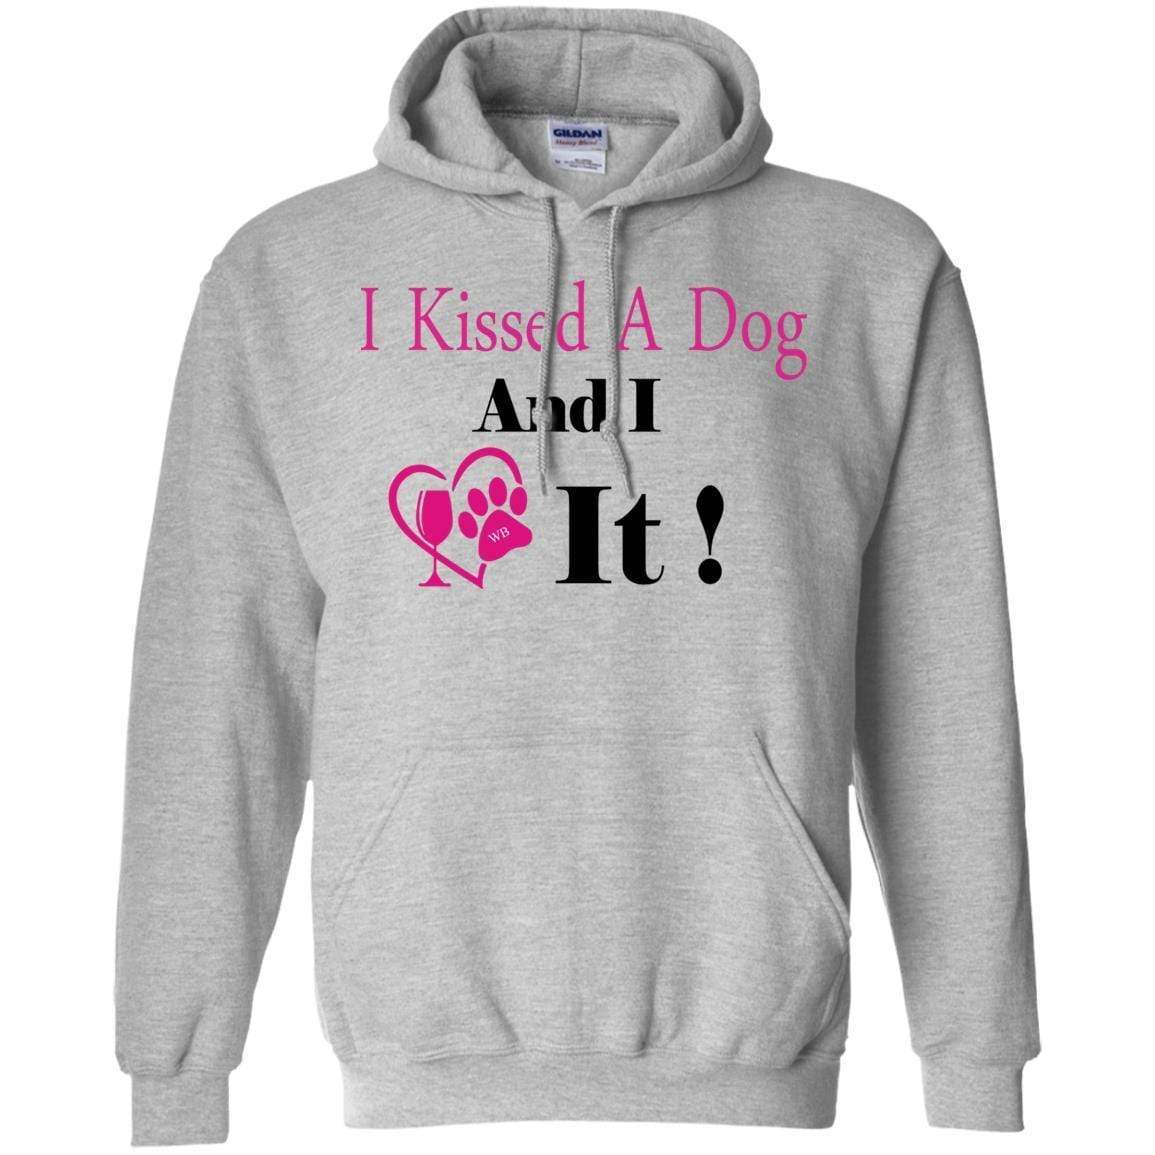 Sweatshirts Sport Grey / S WineyBitches.co "I Kissed A Dog And I Loved It:"  Pullover Unisex Hoodie 8 oz. WineyBitchesCo